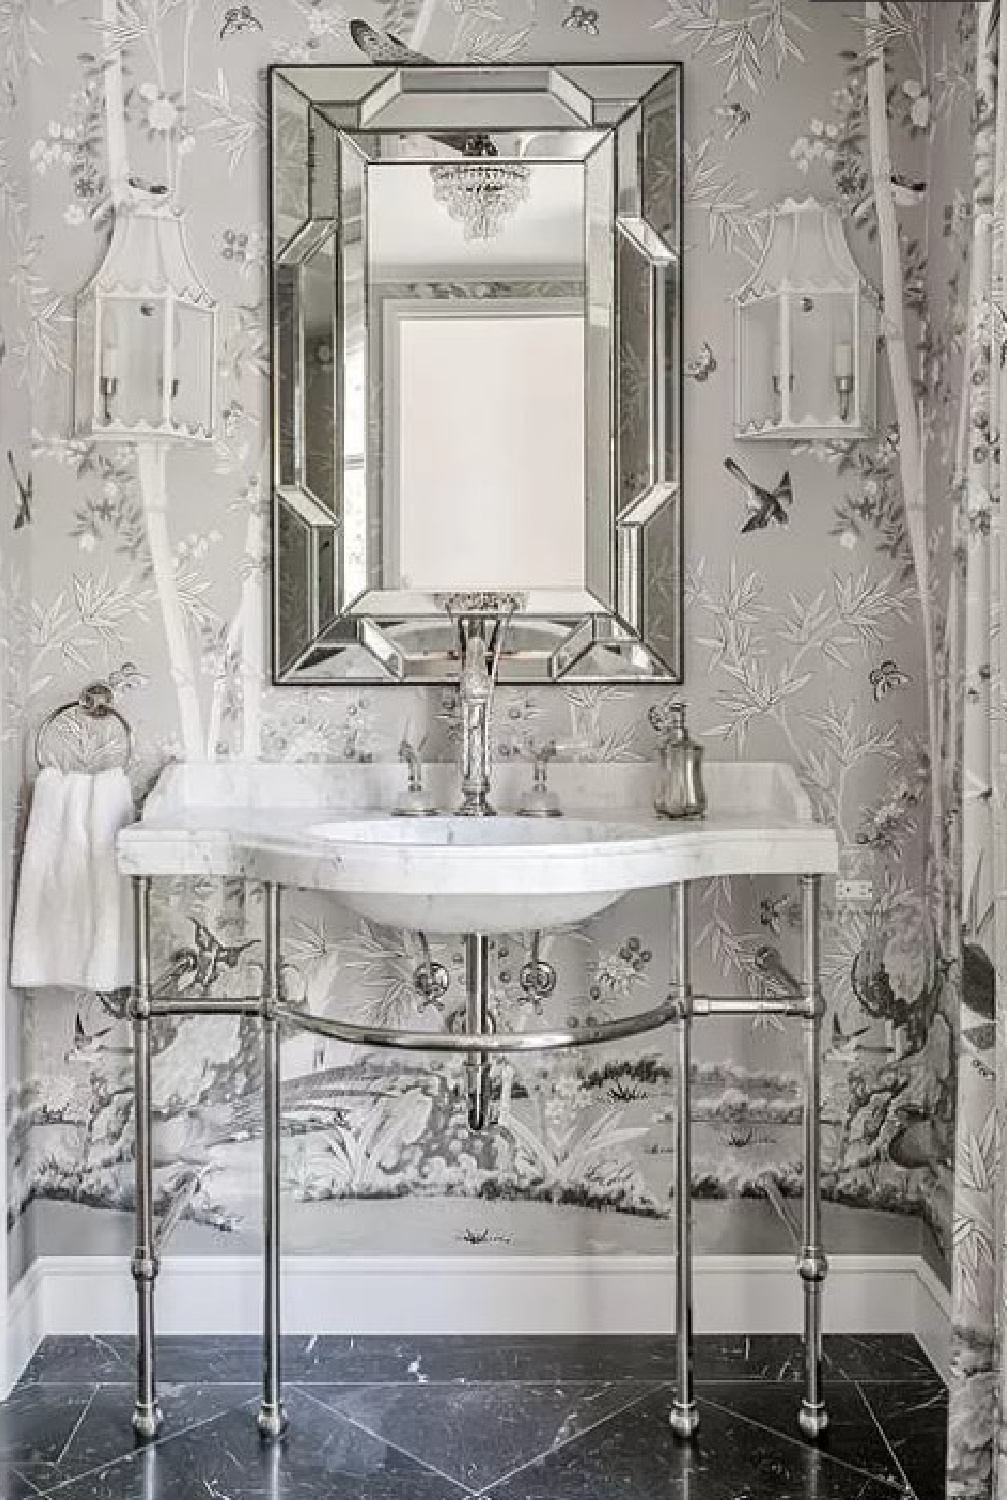 Grisaille wallpaper in a luxurious bath within a Houston chateau.